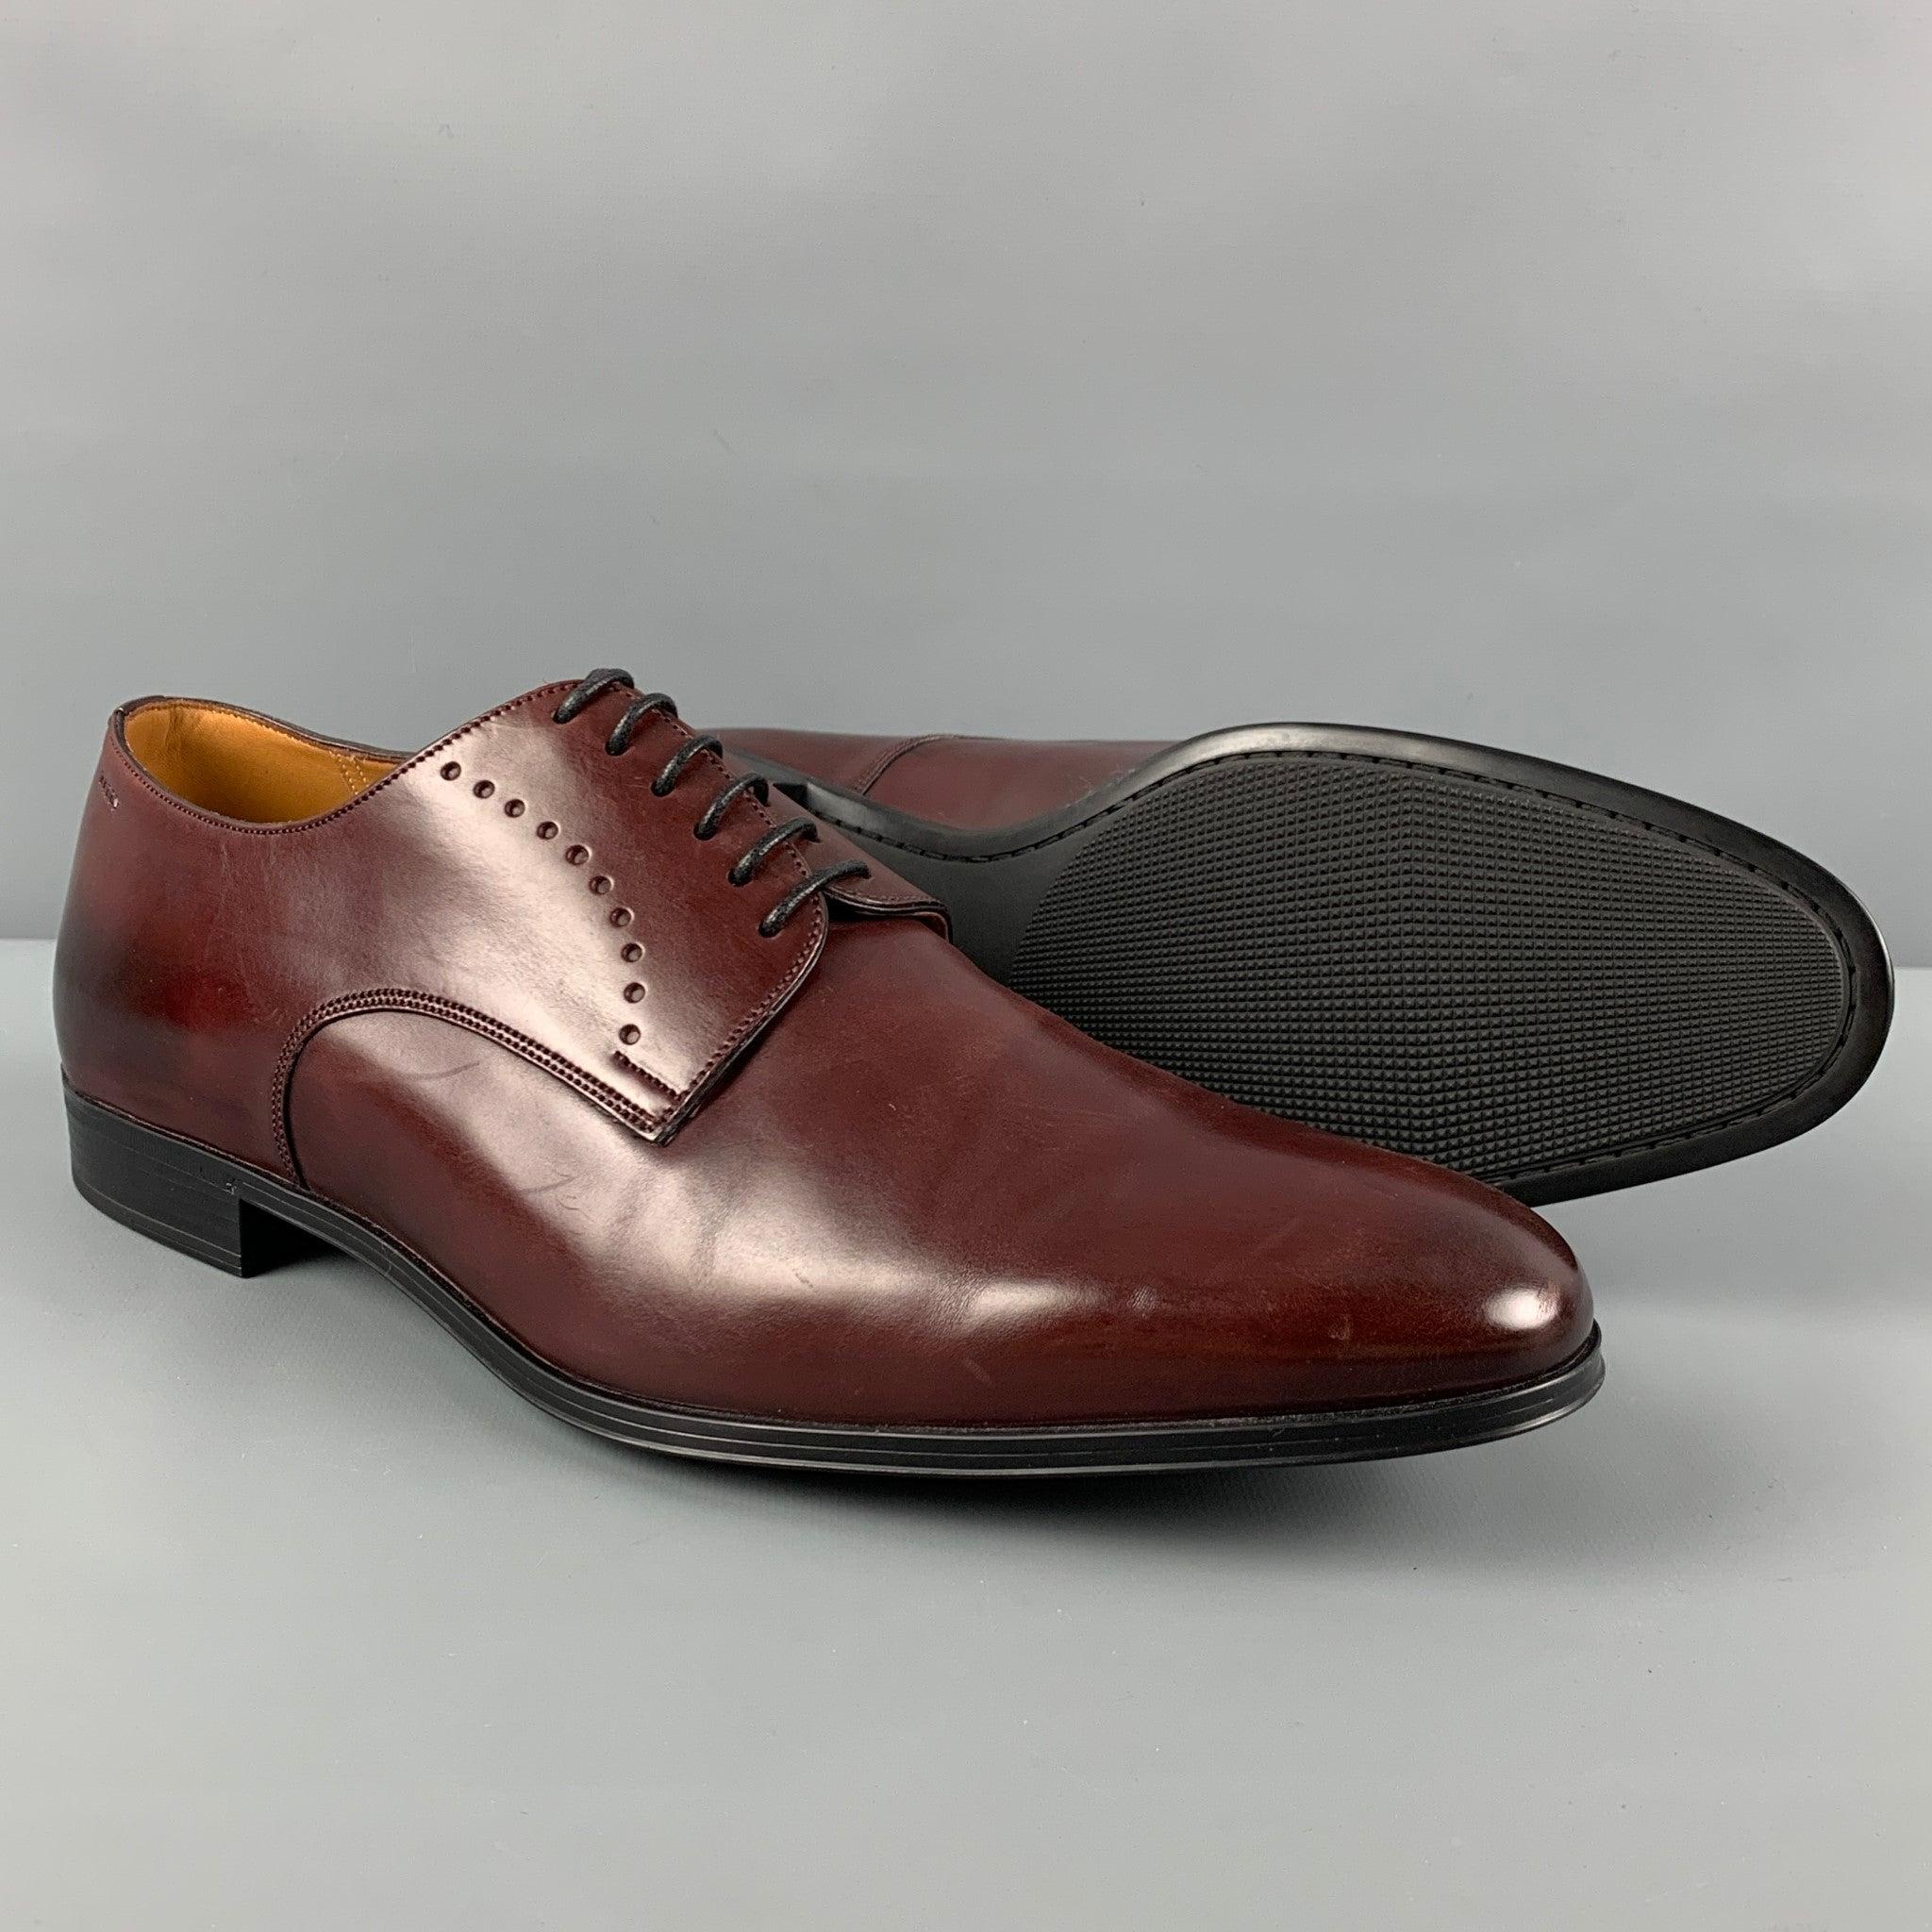 BALLY Size 11.5 Burgundy Leather Lace Up Shoes In Good Condition For Sale In San Francisco, CA